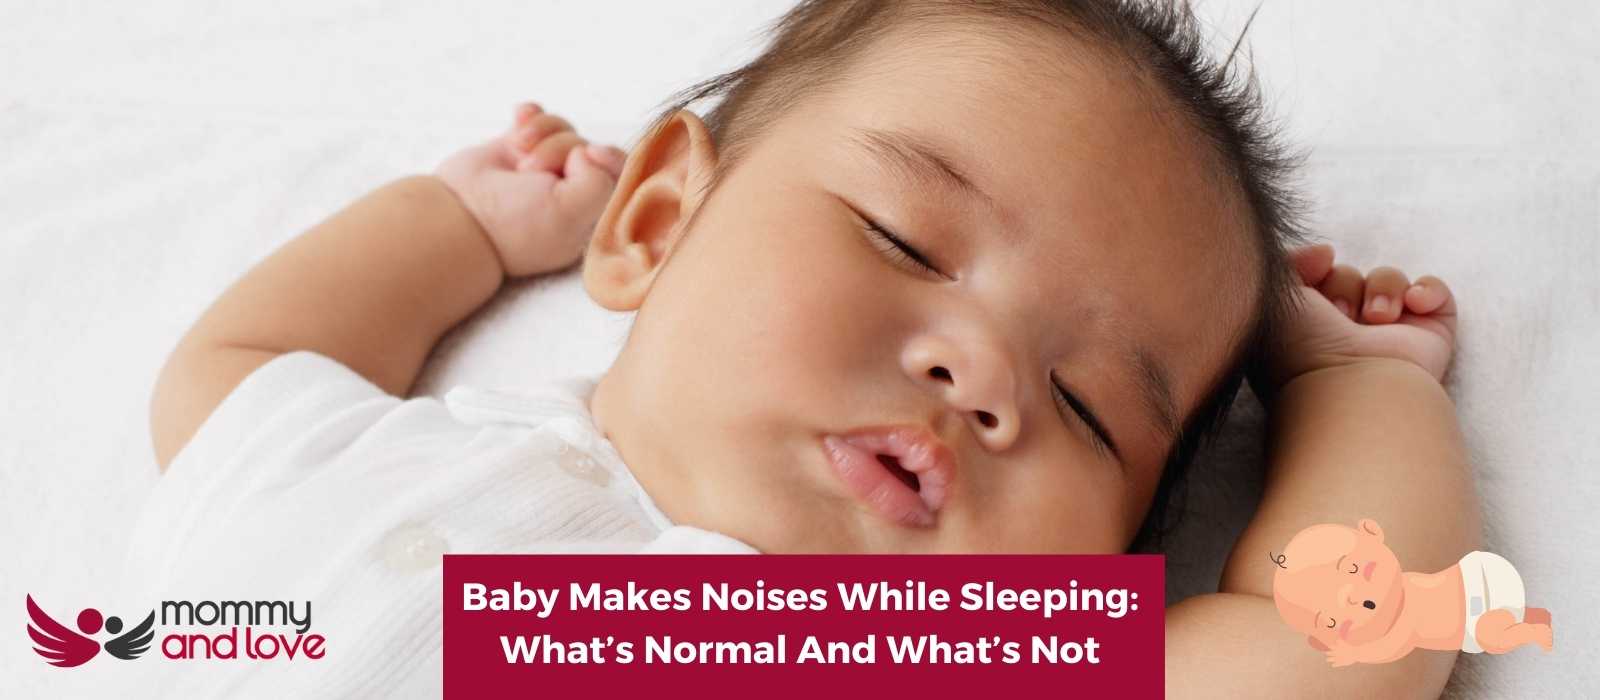 Baby Makes Noises While Sleeping